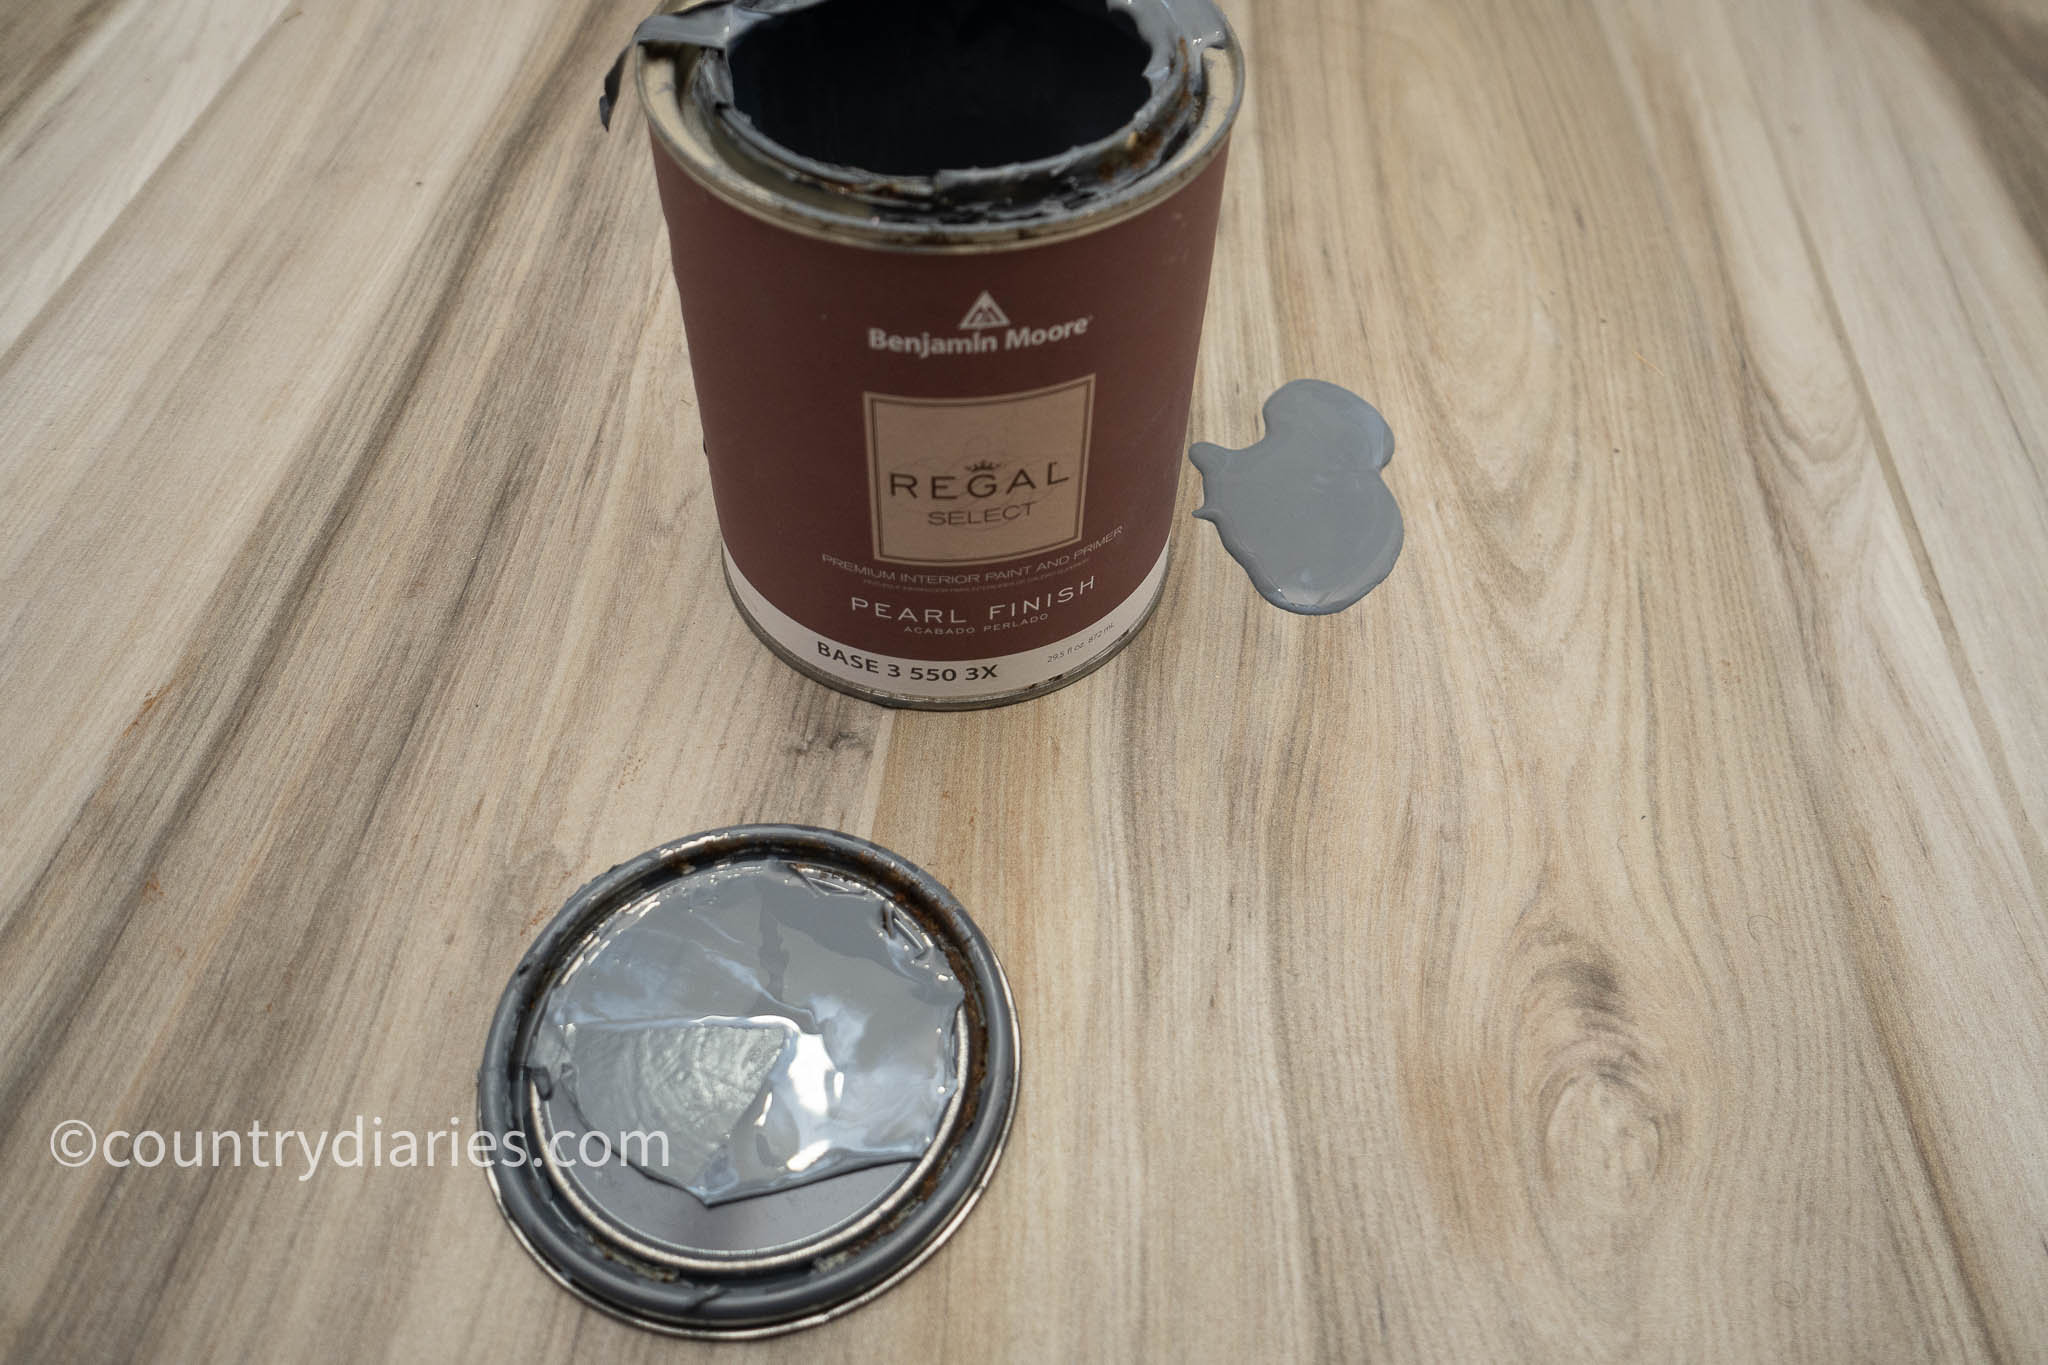 regal select can of paint opened with some poured on the floor tiles